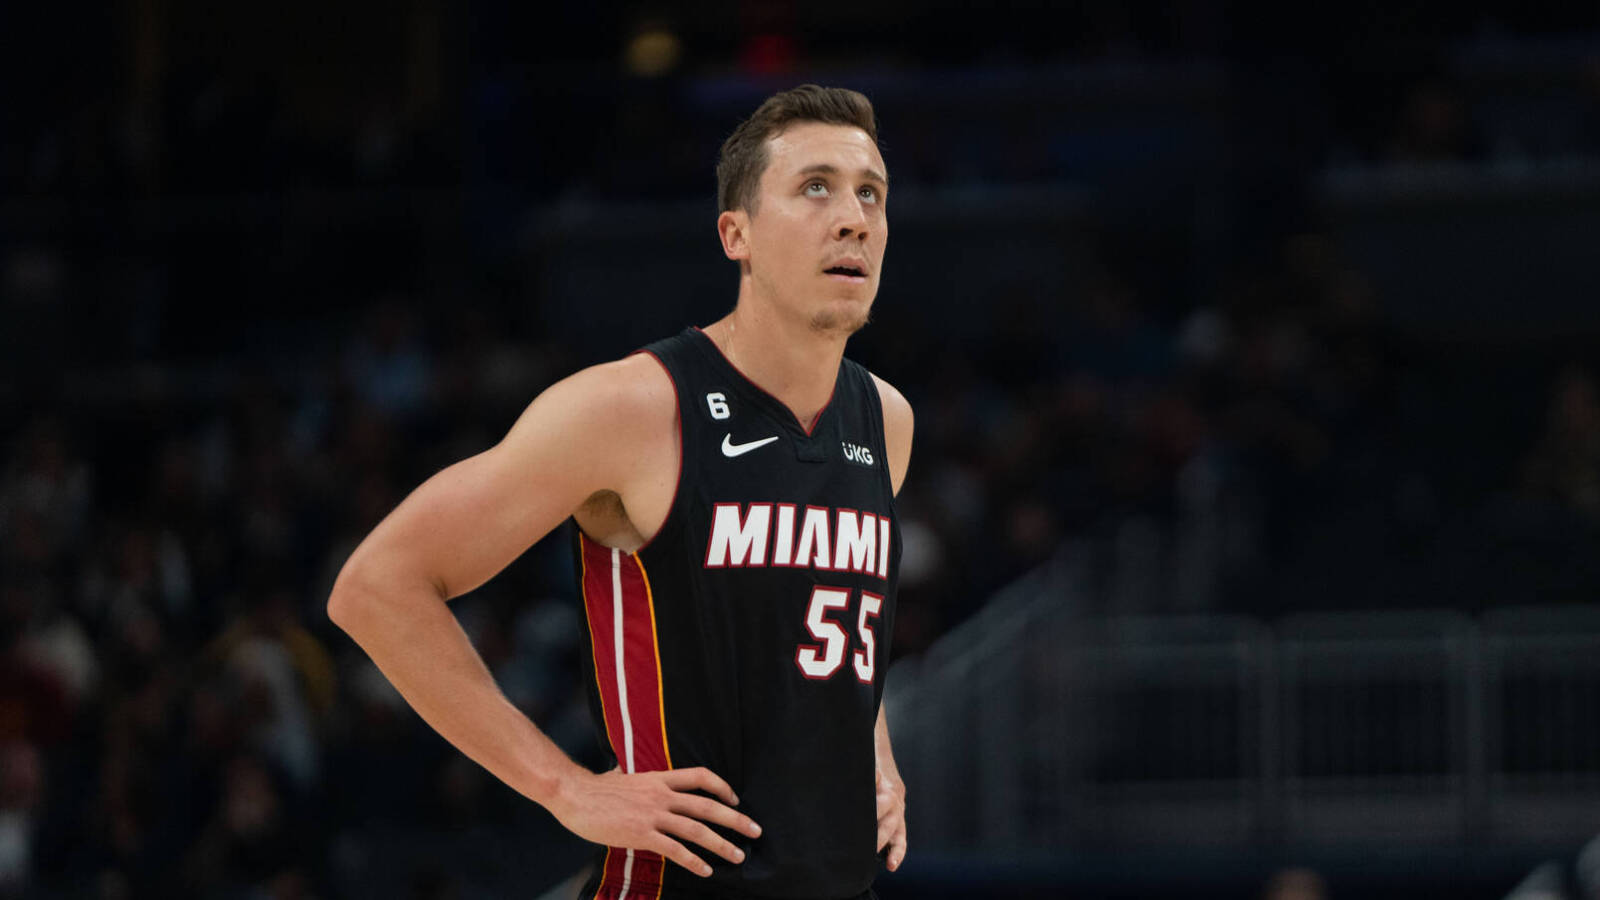 Duncan Robinson undergoing finger surgery, out at least four weeks